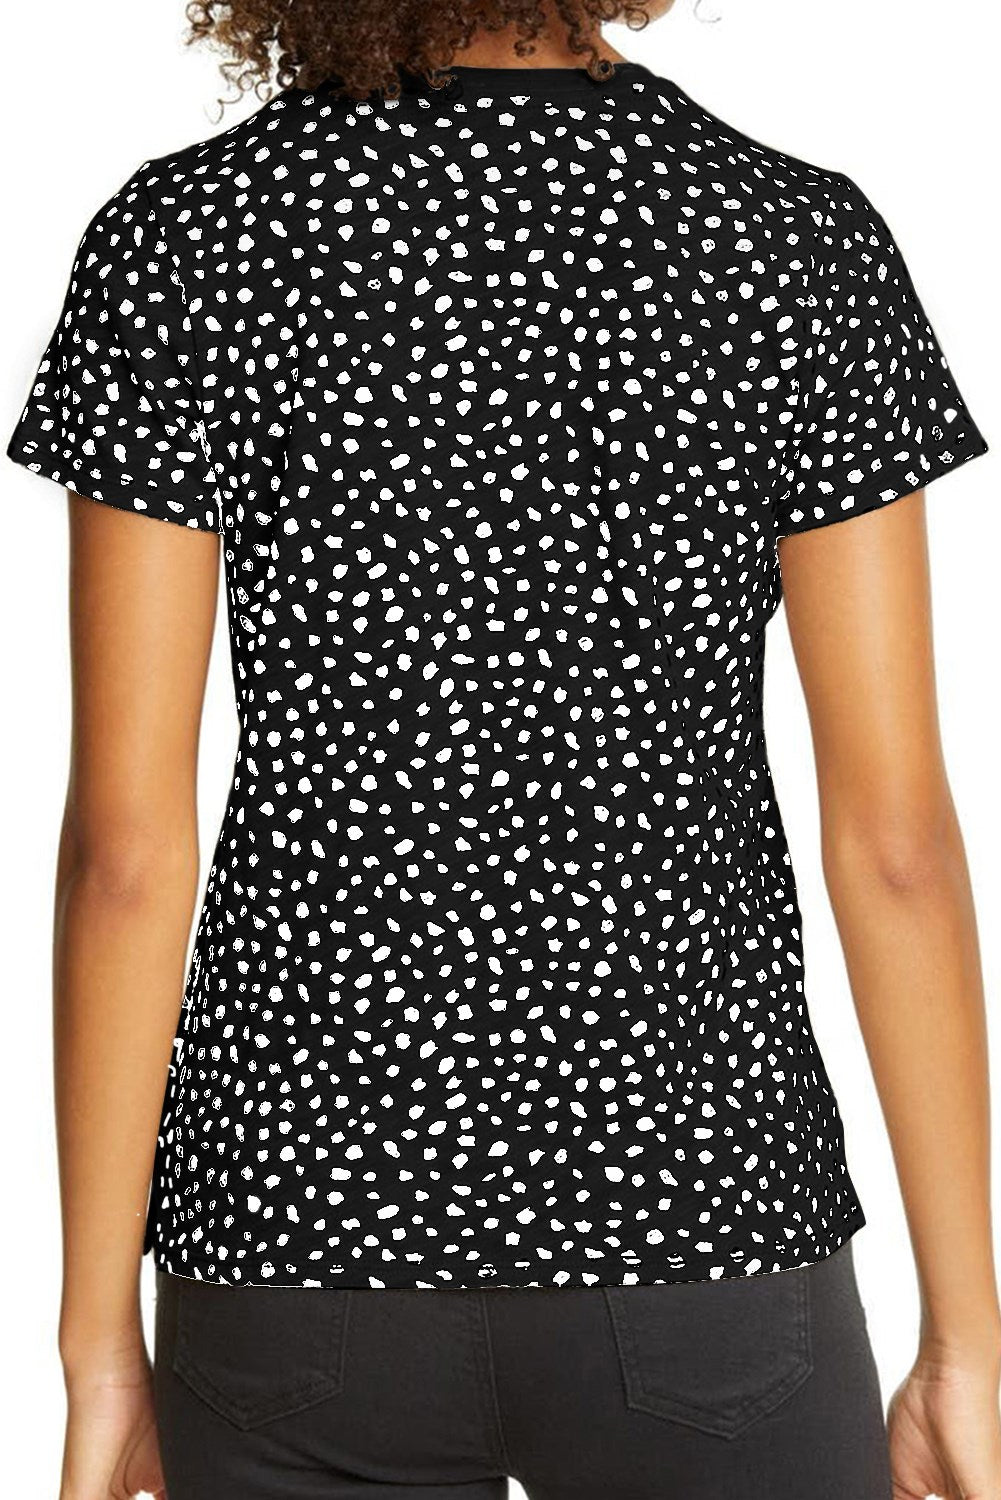 Short Sleeve Spotted Tee T Shirt Top